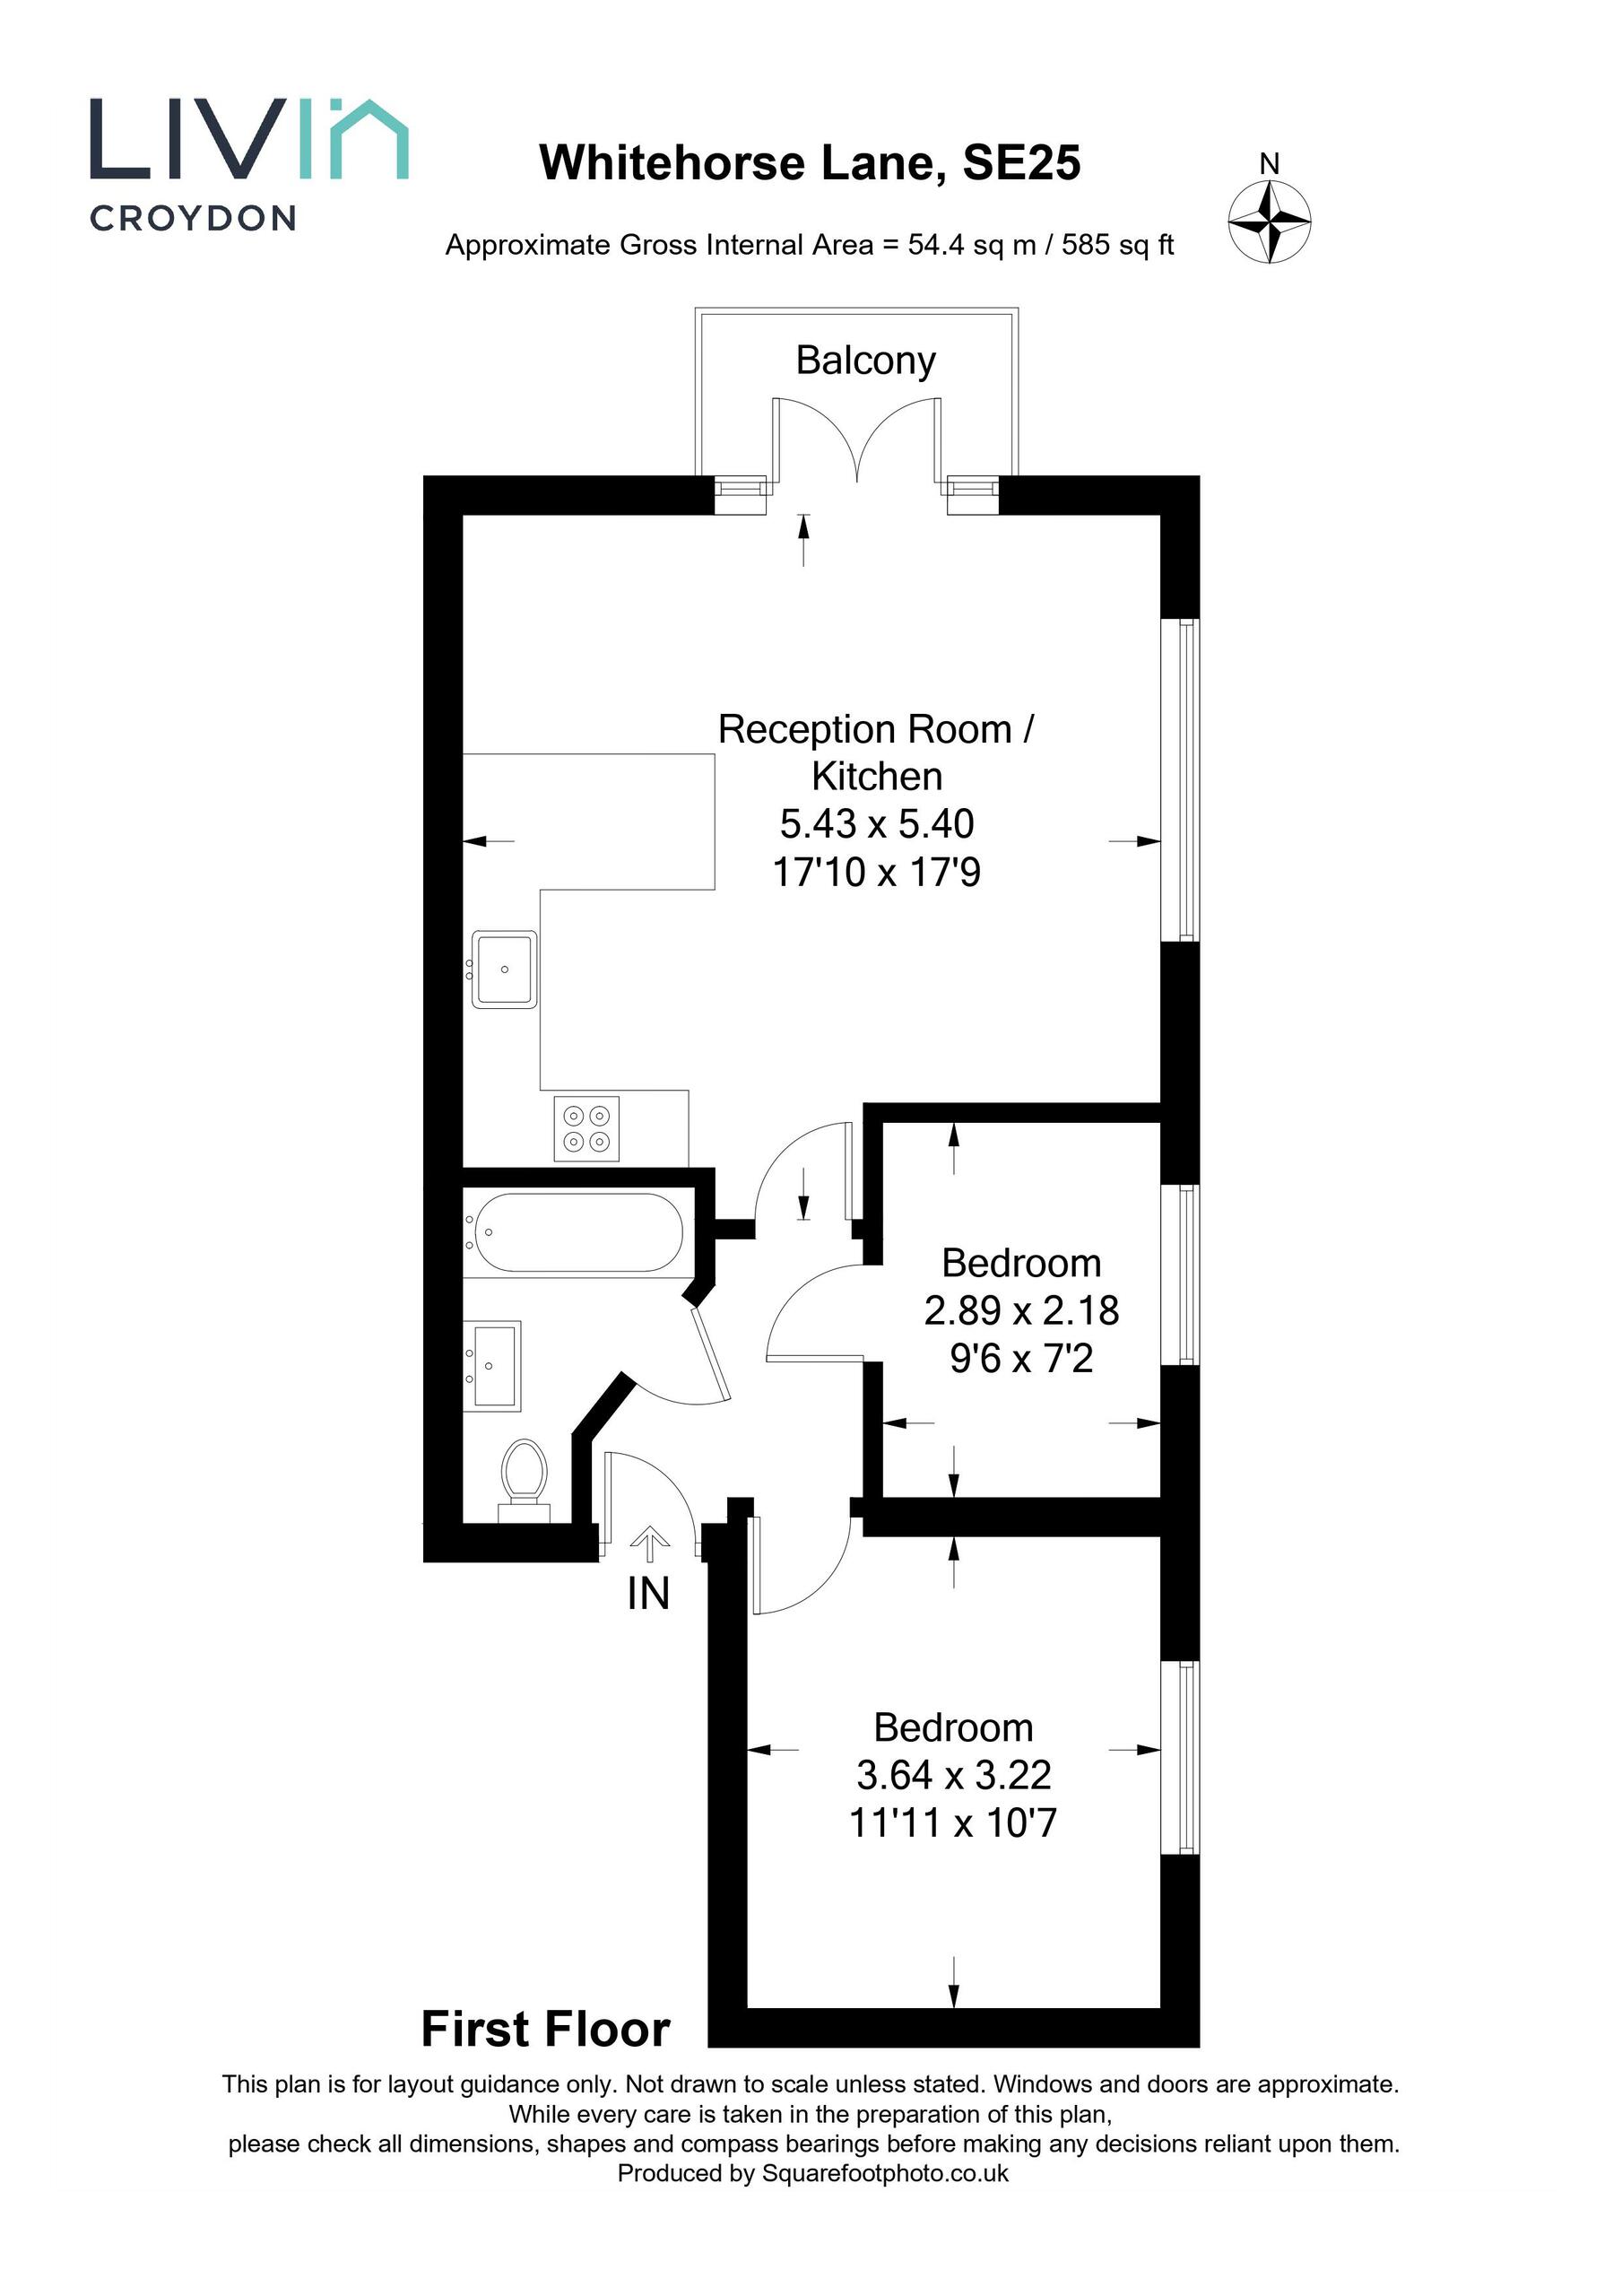 2 bed apartment for sale in Whitehorse Lane, London - Property floorplan